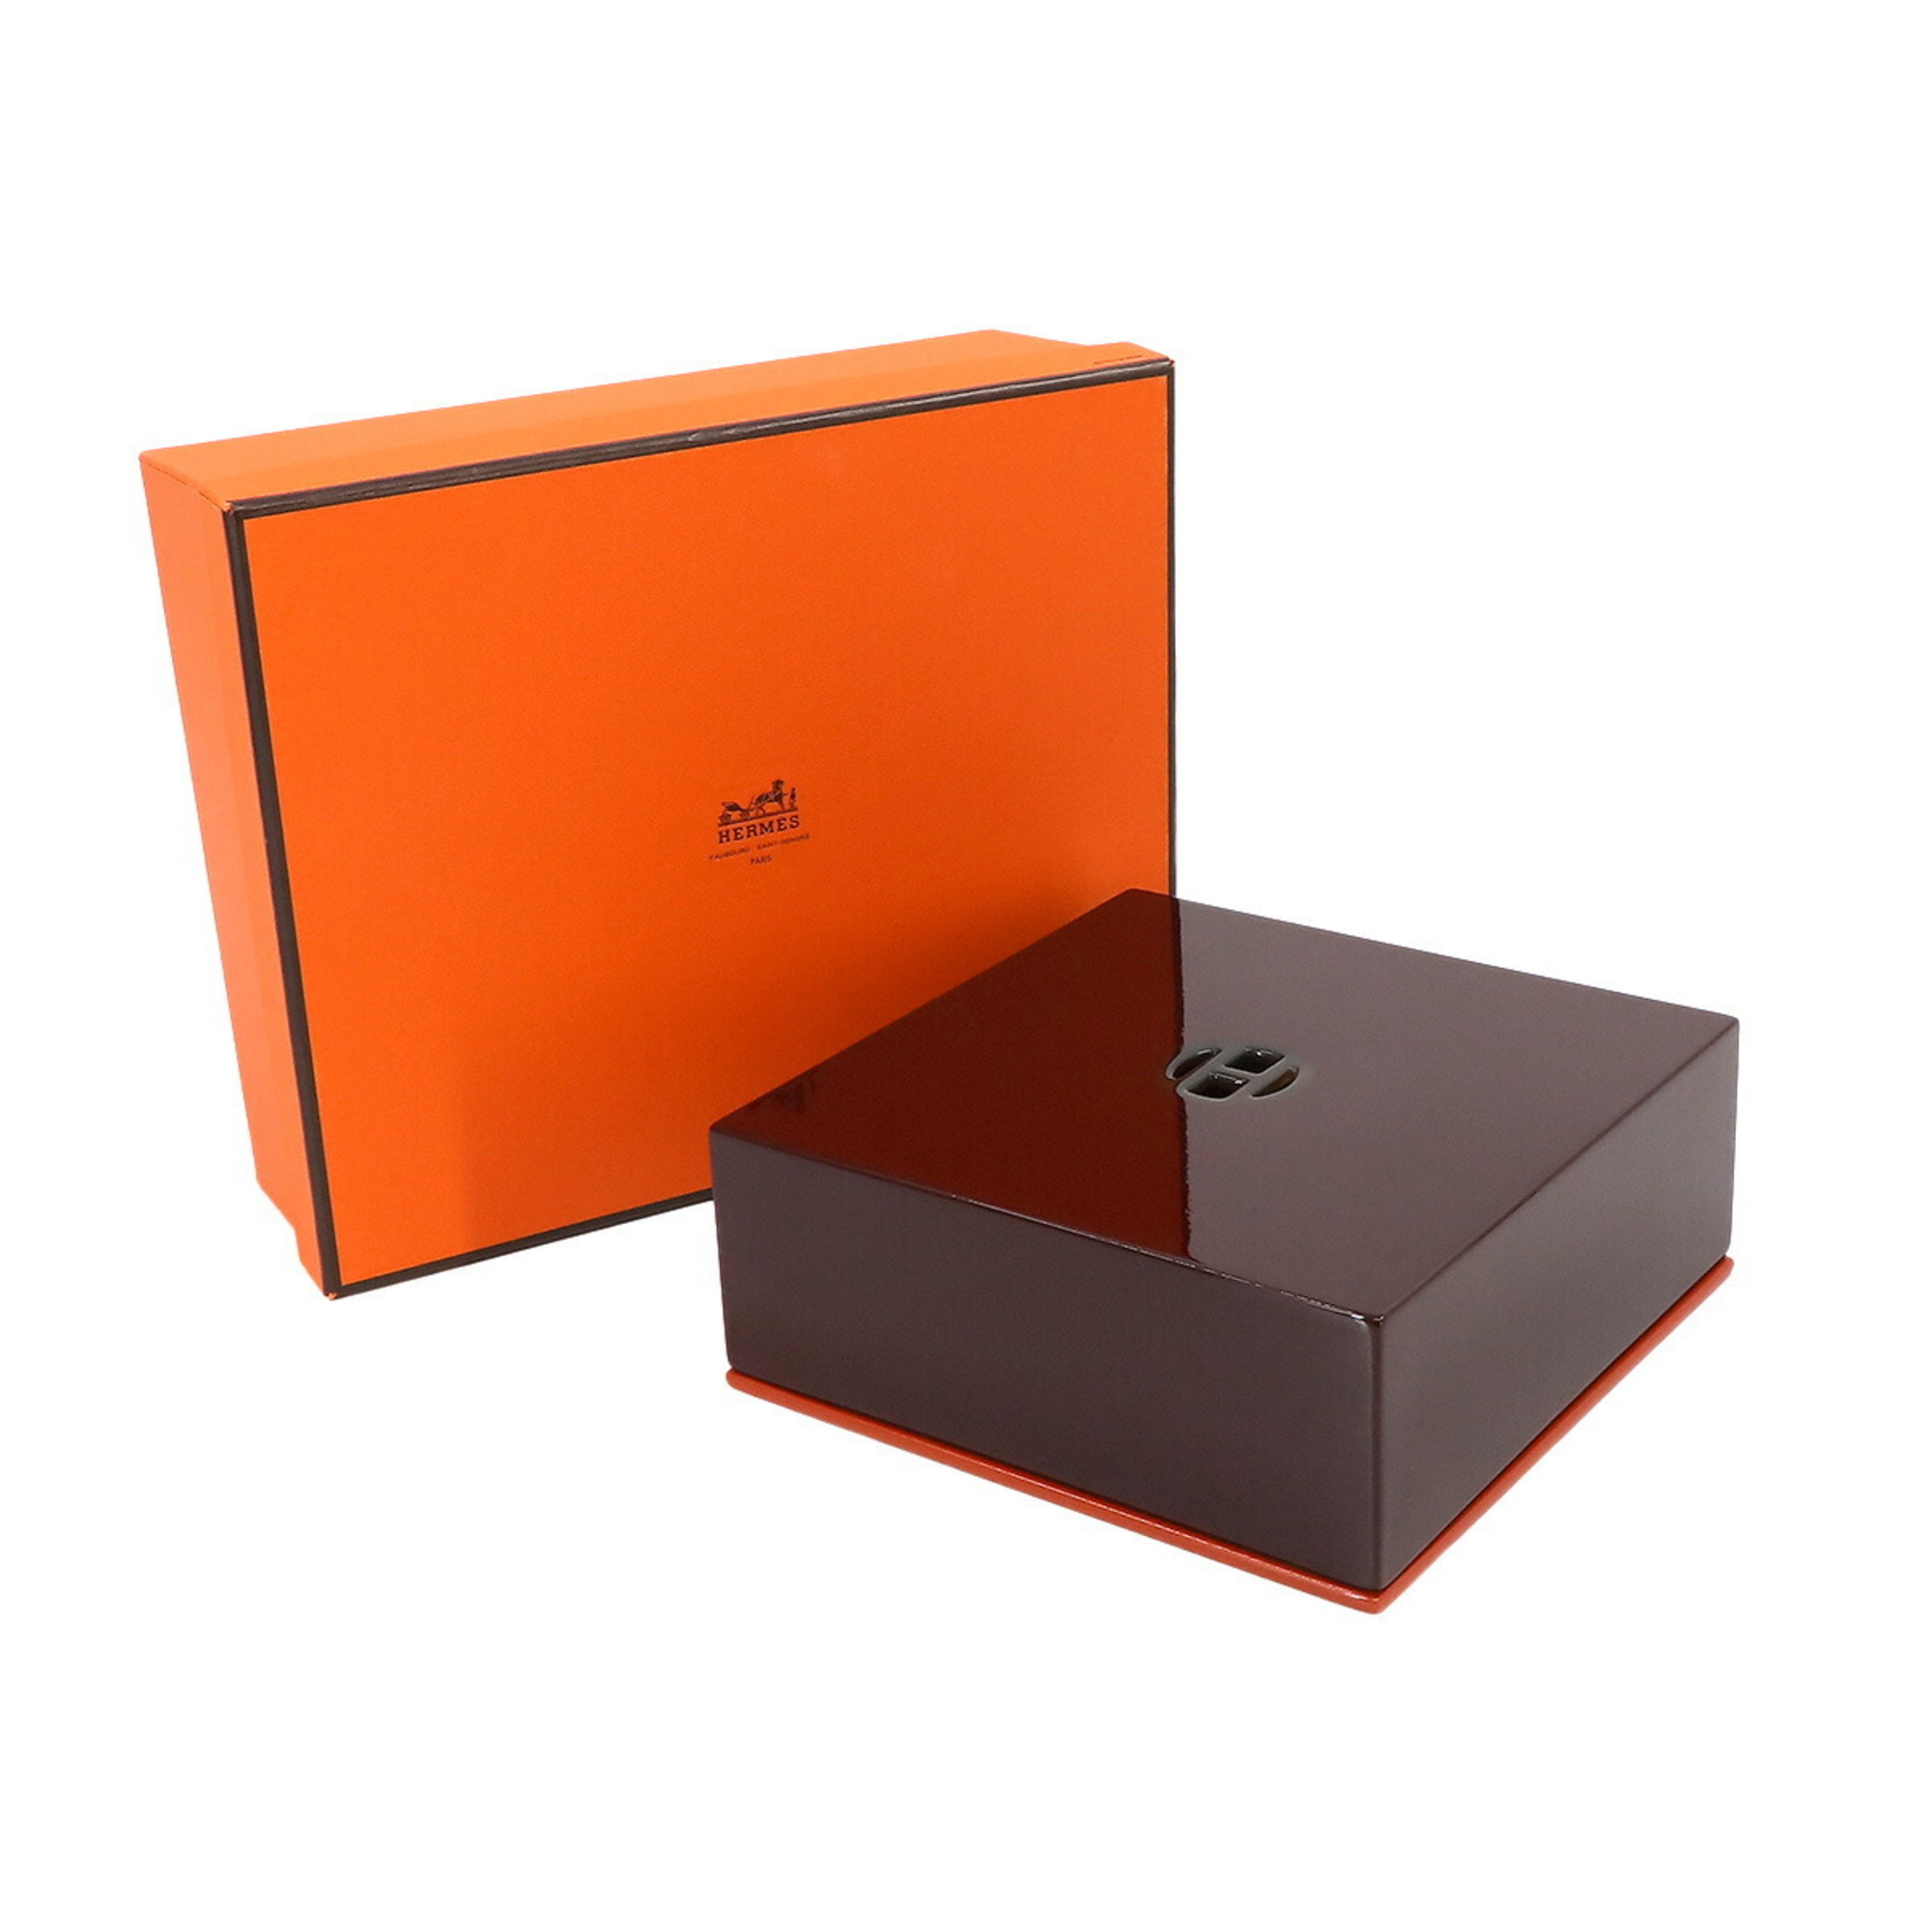 Hermes HERMES Box Accessory Case Lacquer Wood Buffalo Horn Brown Orange